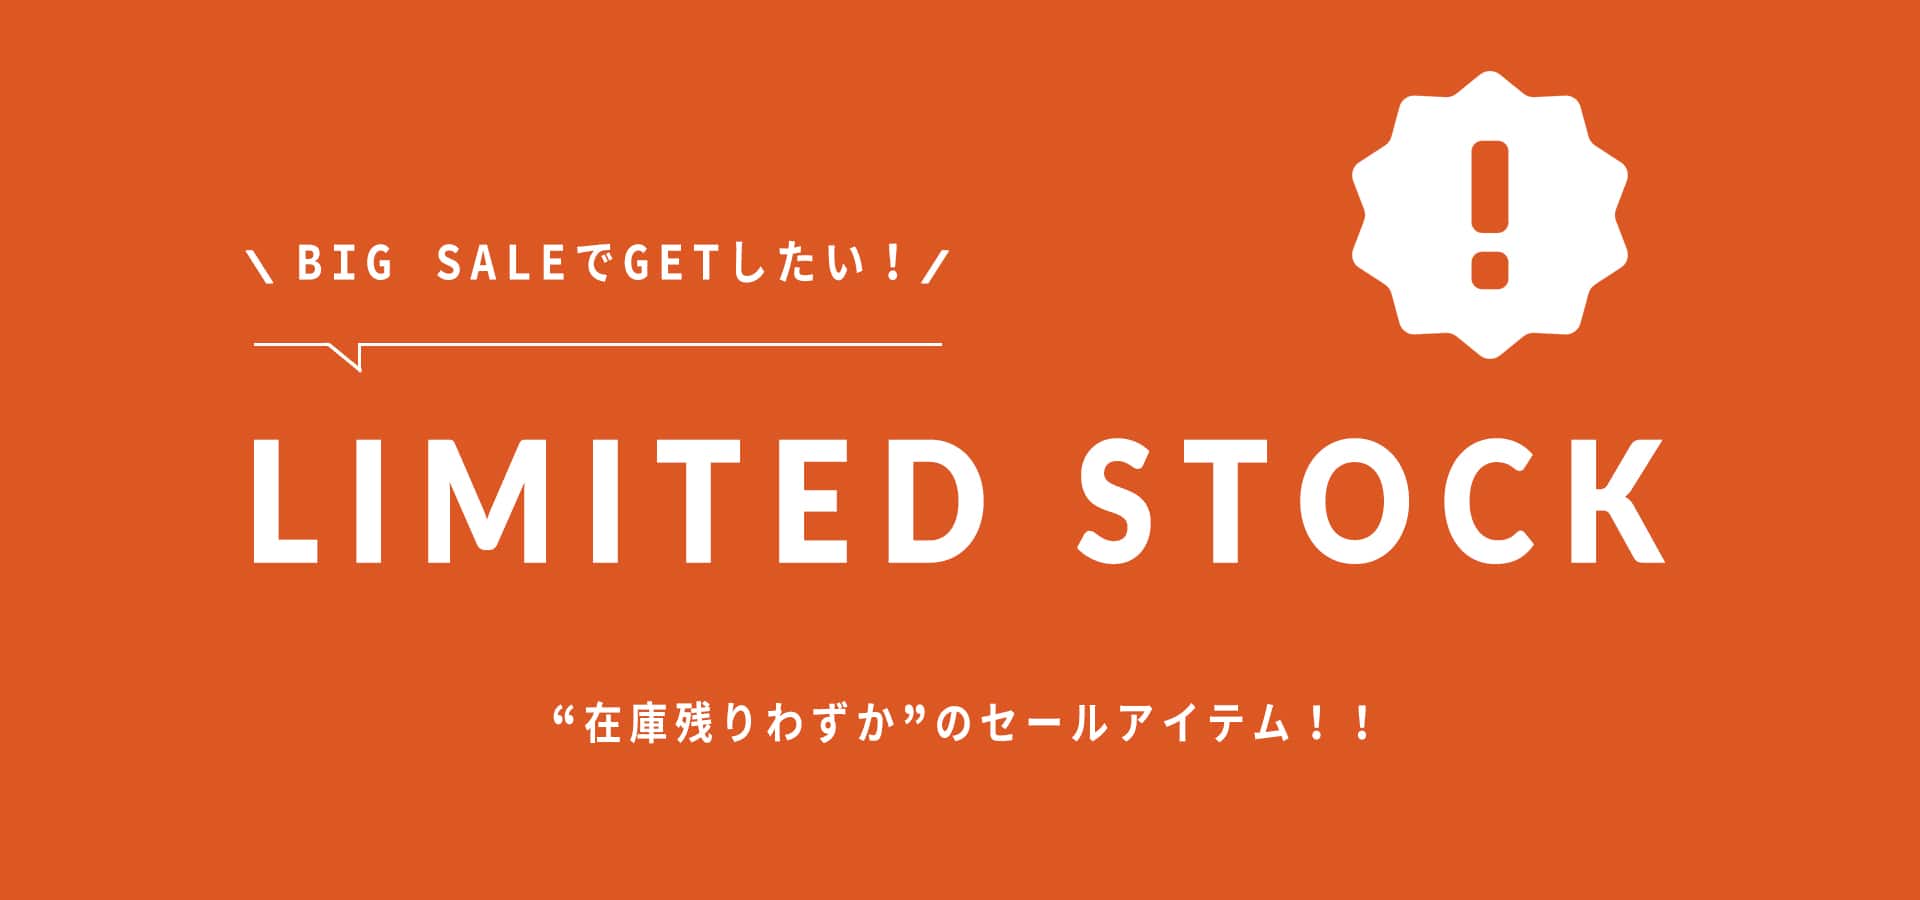 2023.2.15 BIG SALE LIMITED STOCK